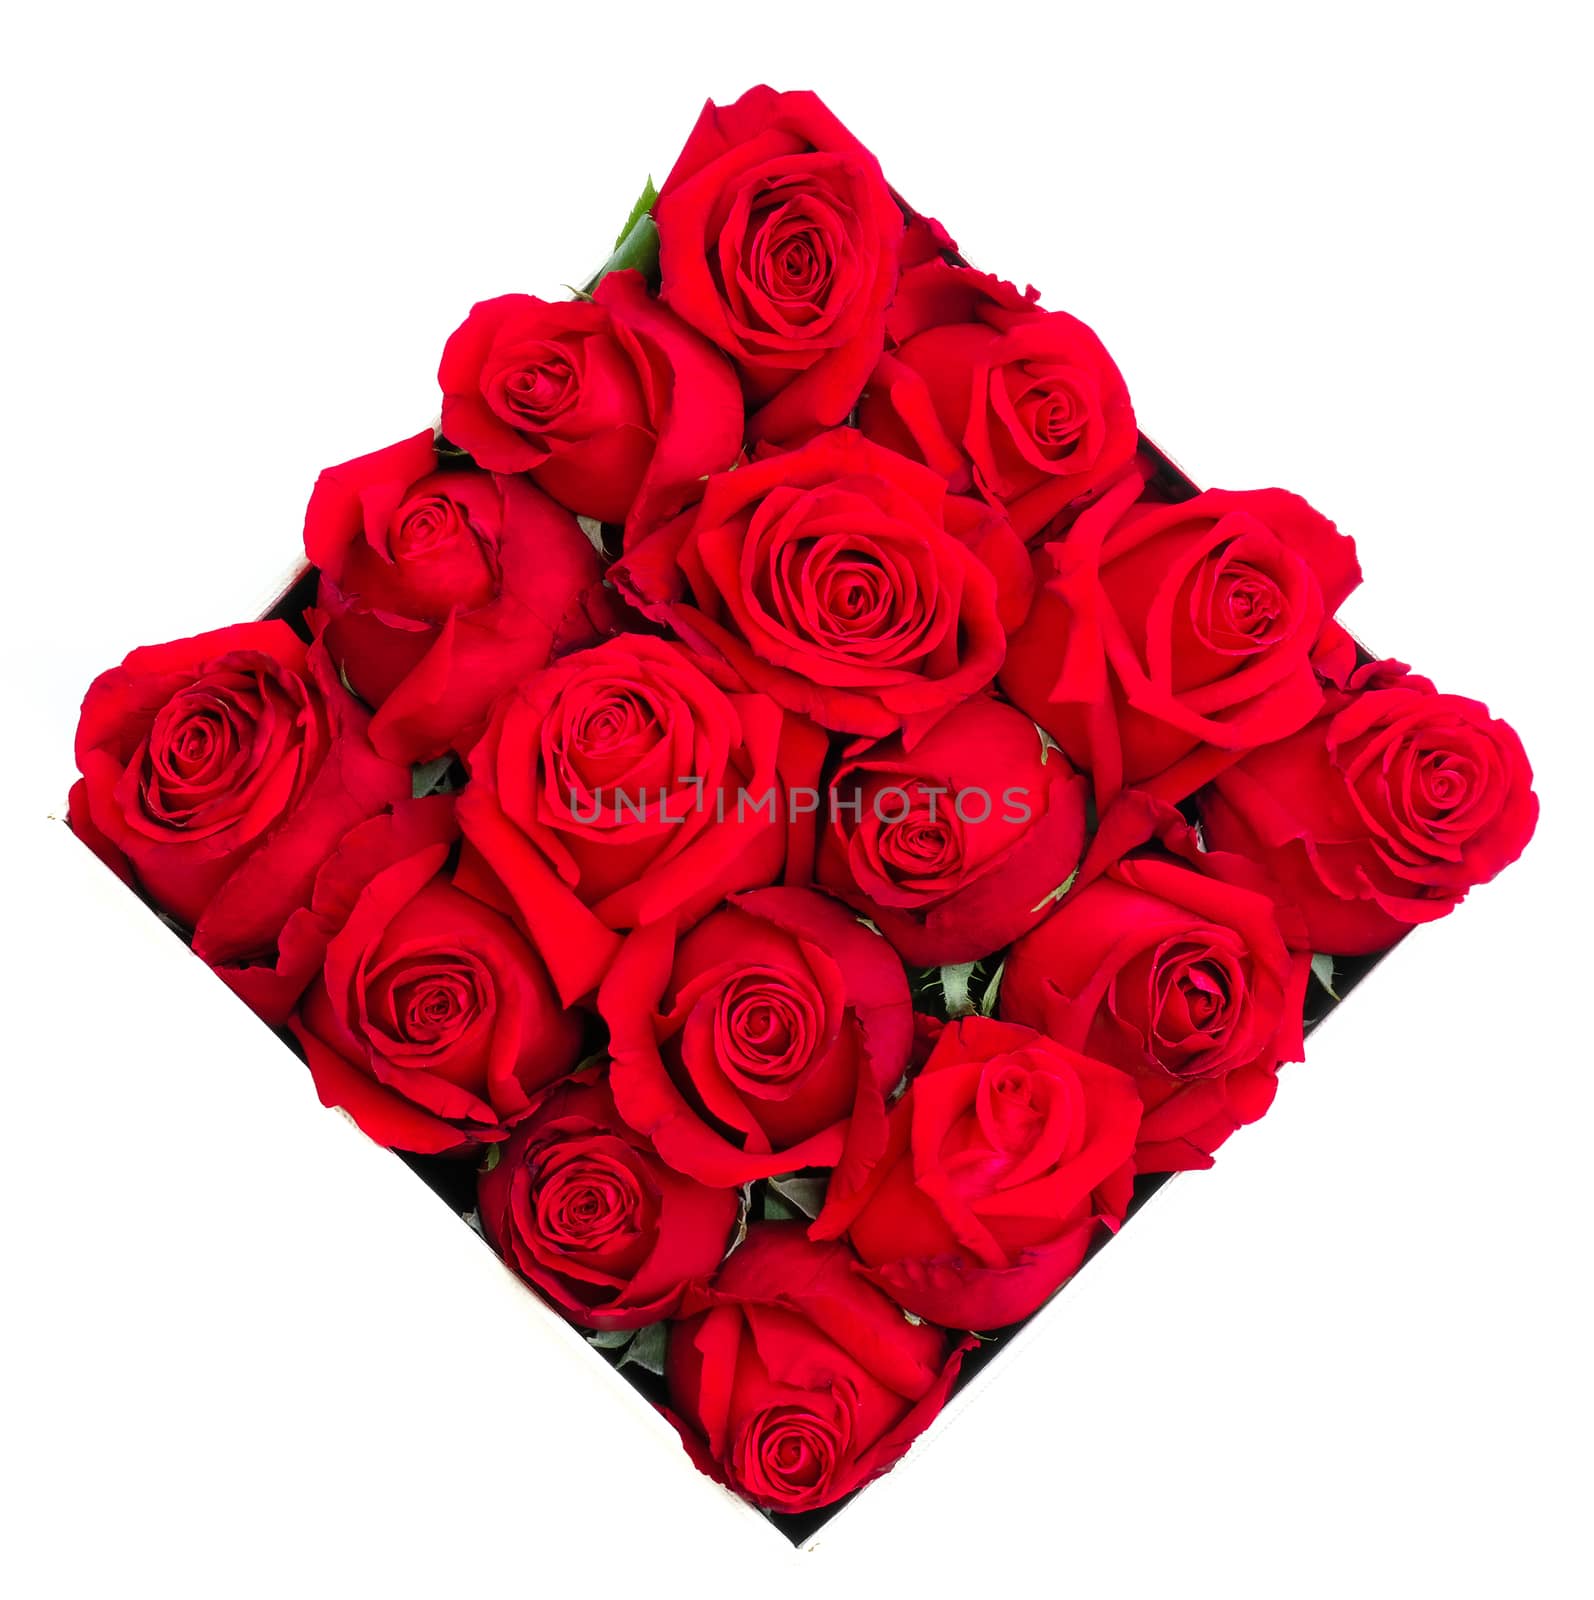 a box of red roses on white background